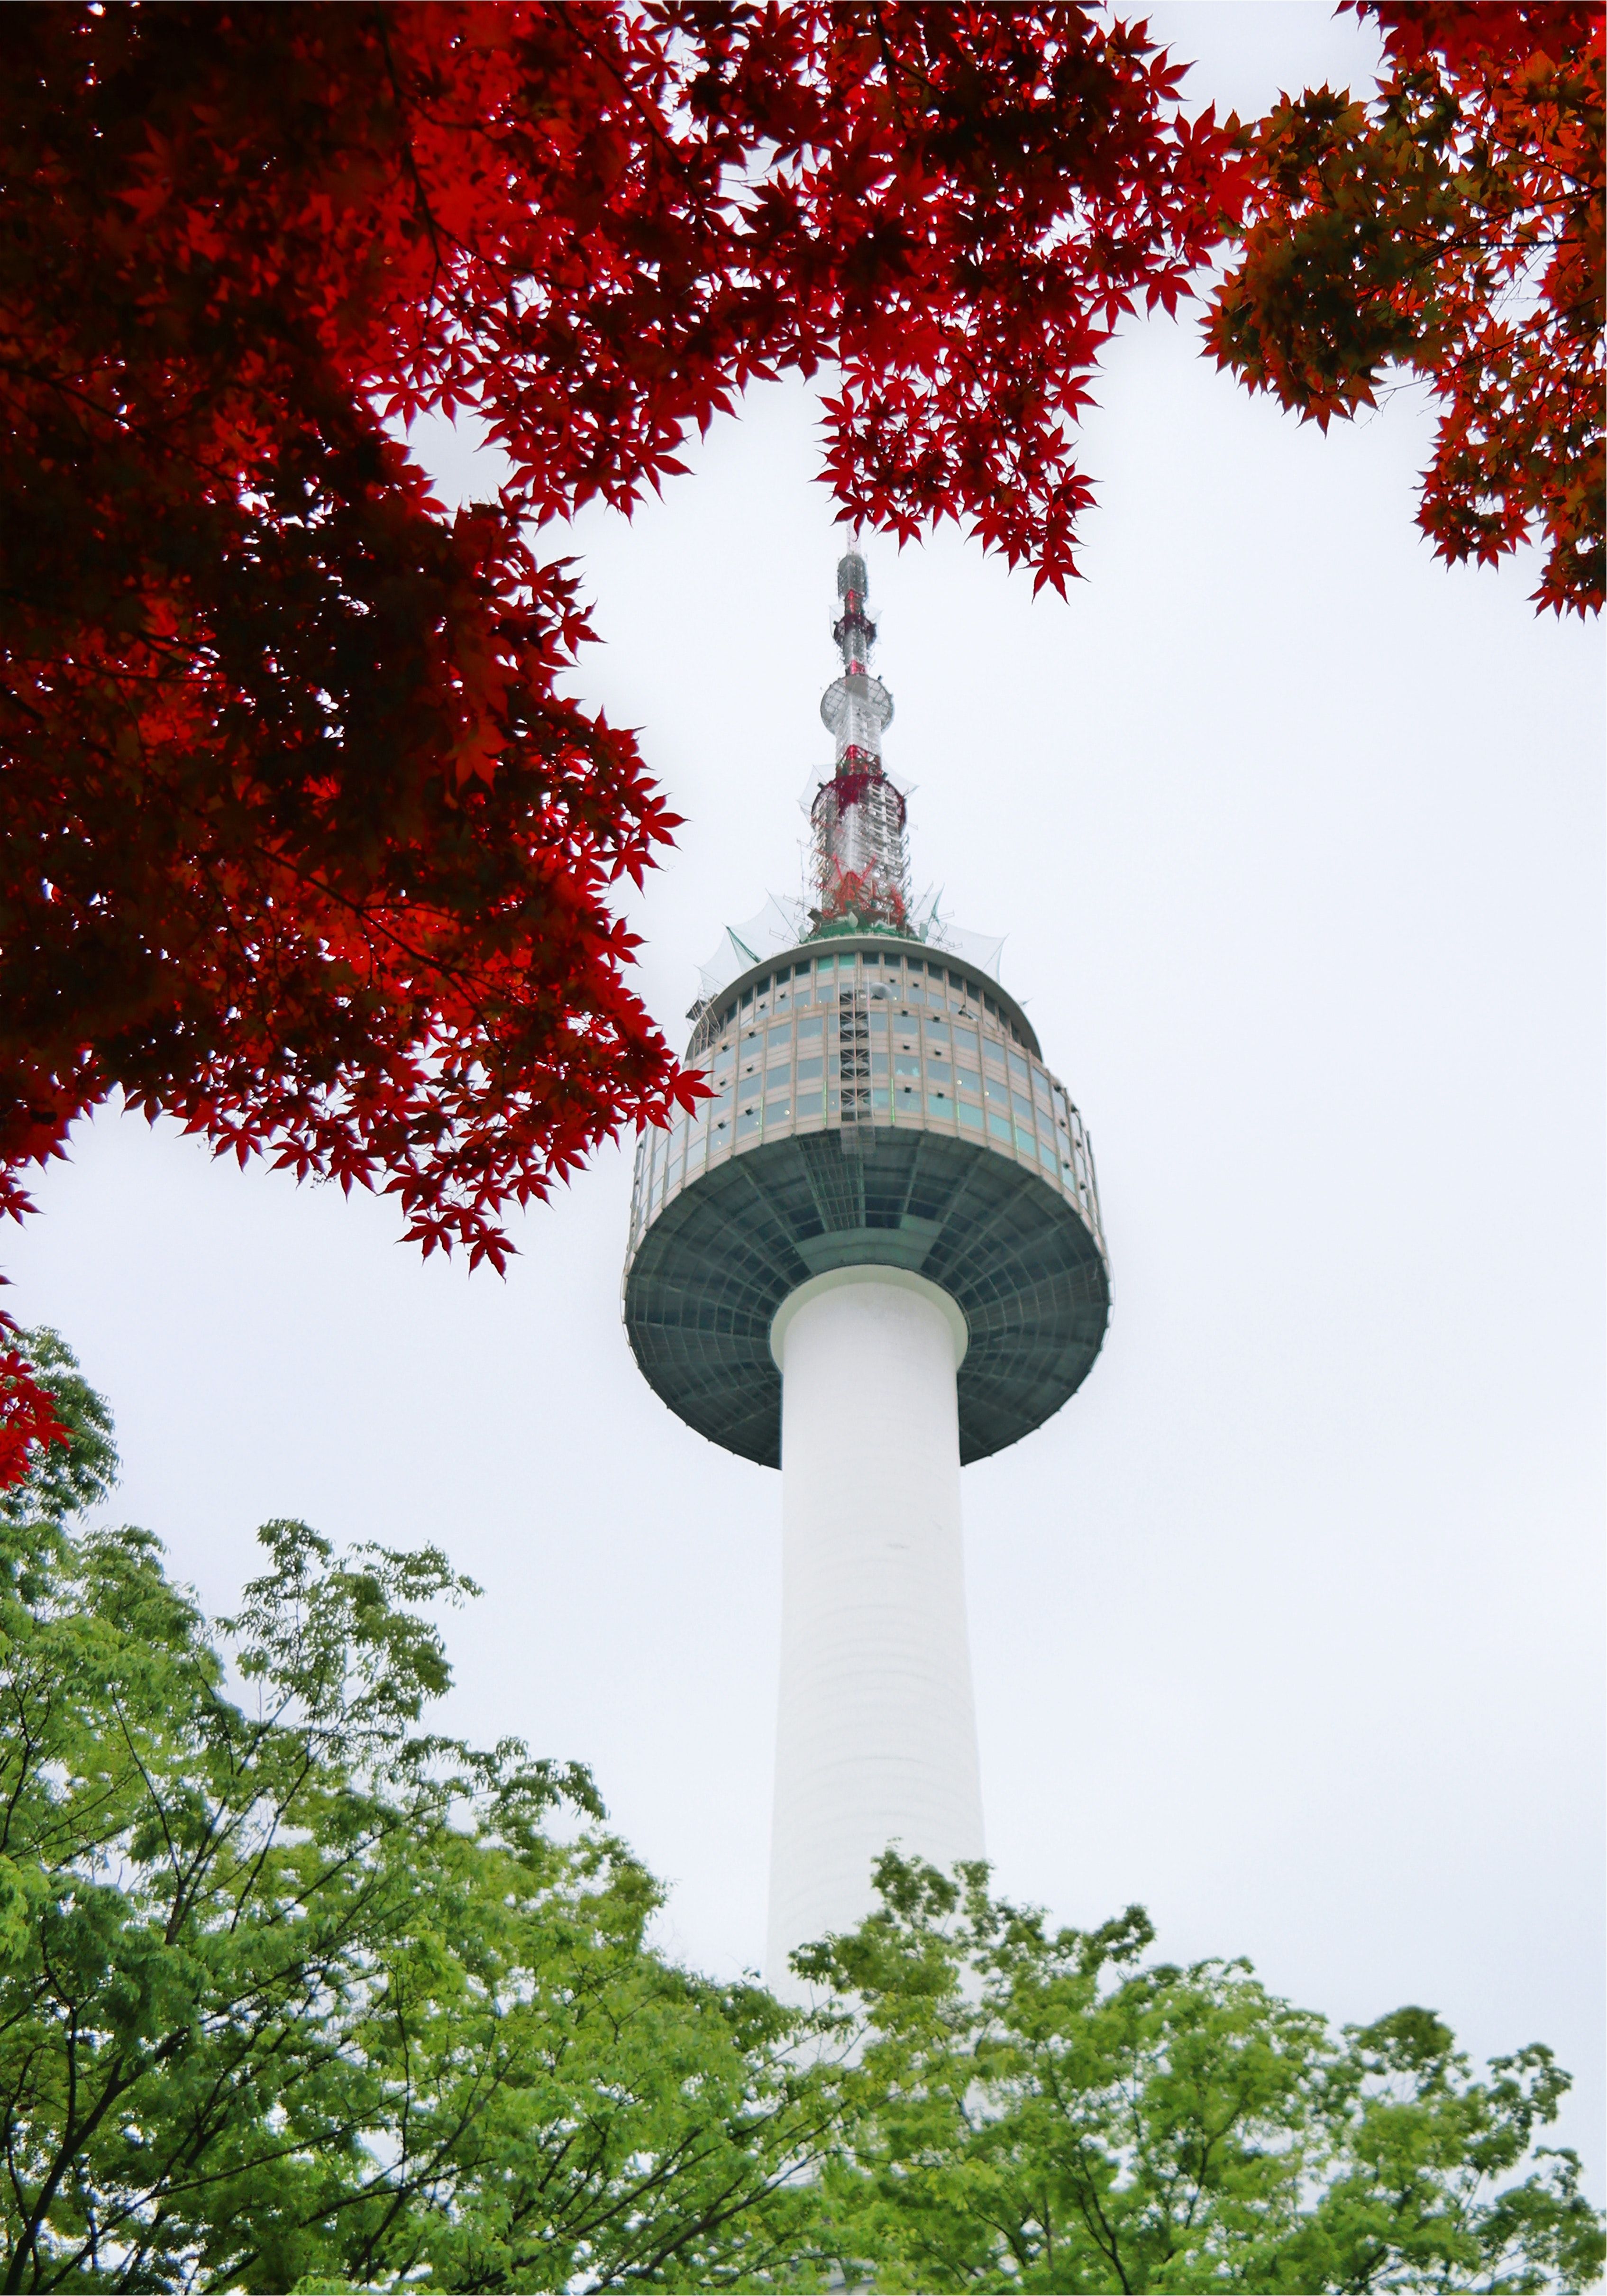 The Namsan Seoul Tower is a communication tower located on Namsan Mountain. - Seoul